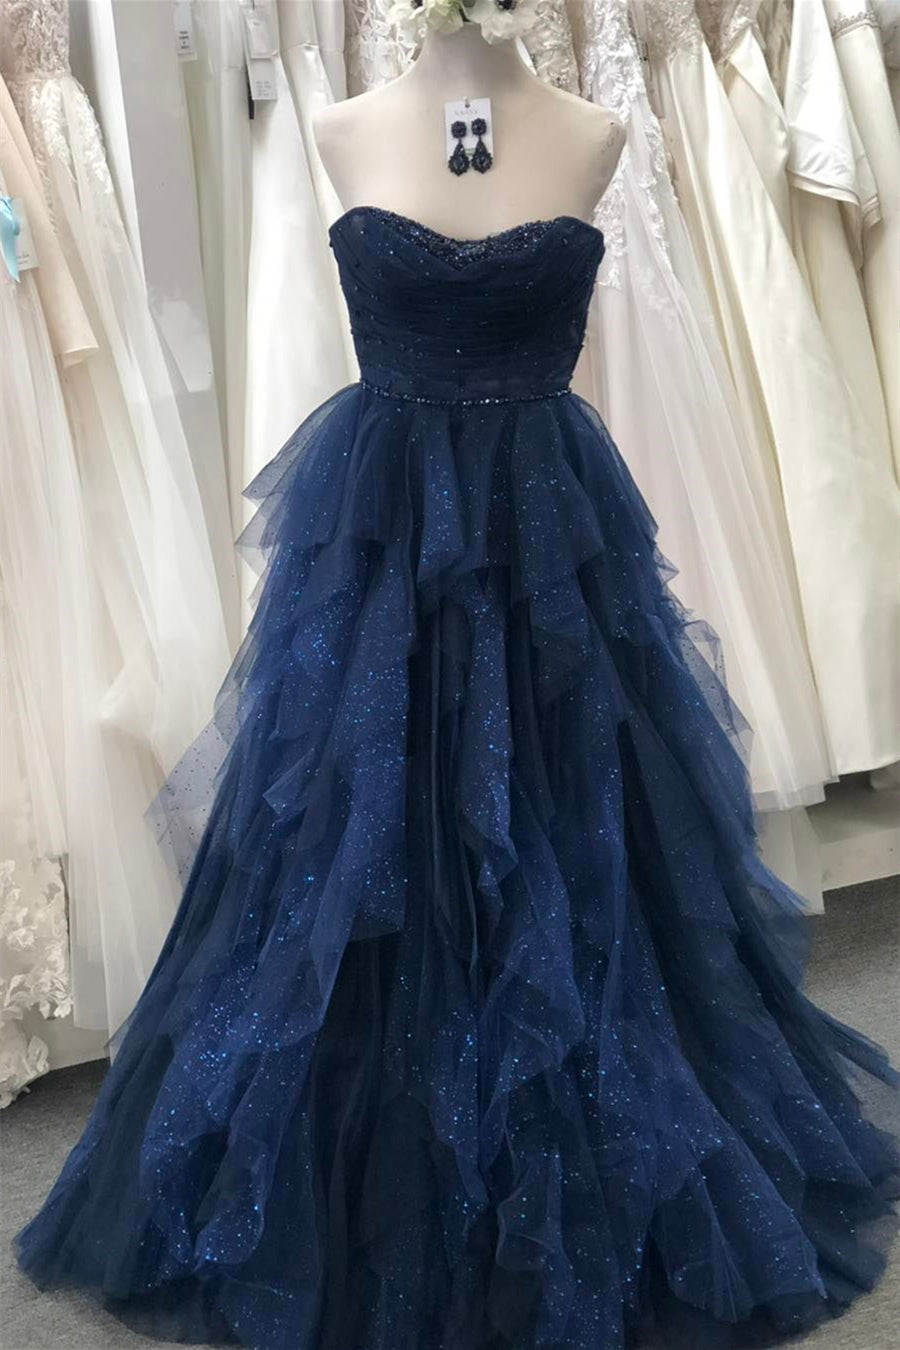 Sparkly Navy Blue Strapless Ruffle Layers Tulle Long Prom Dress